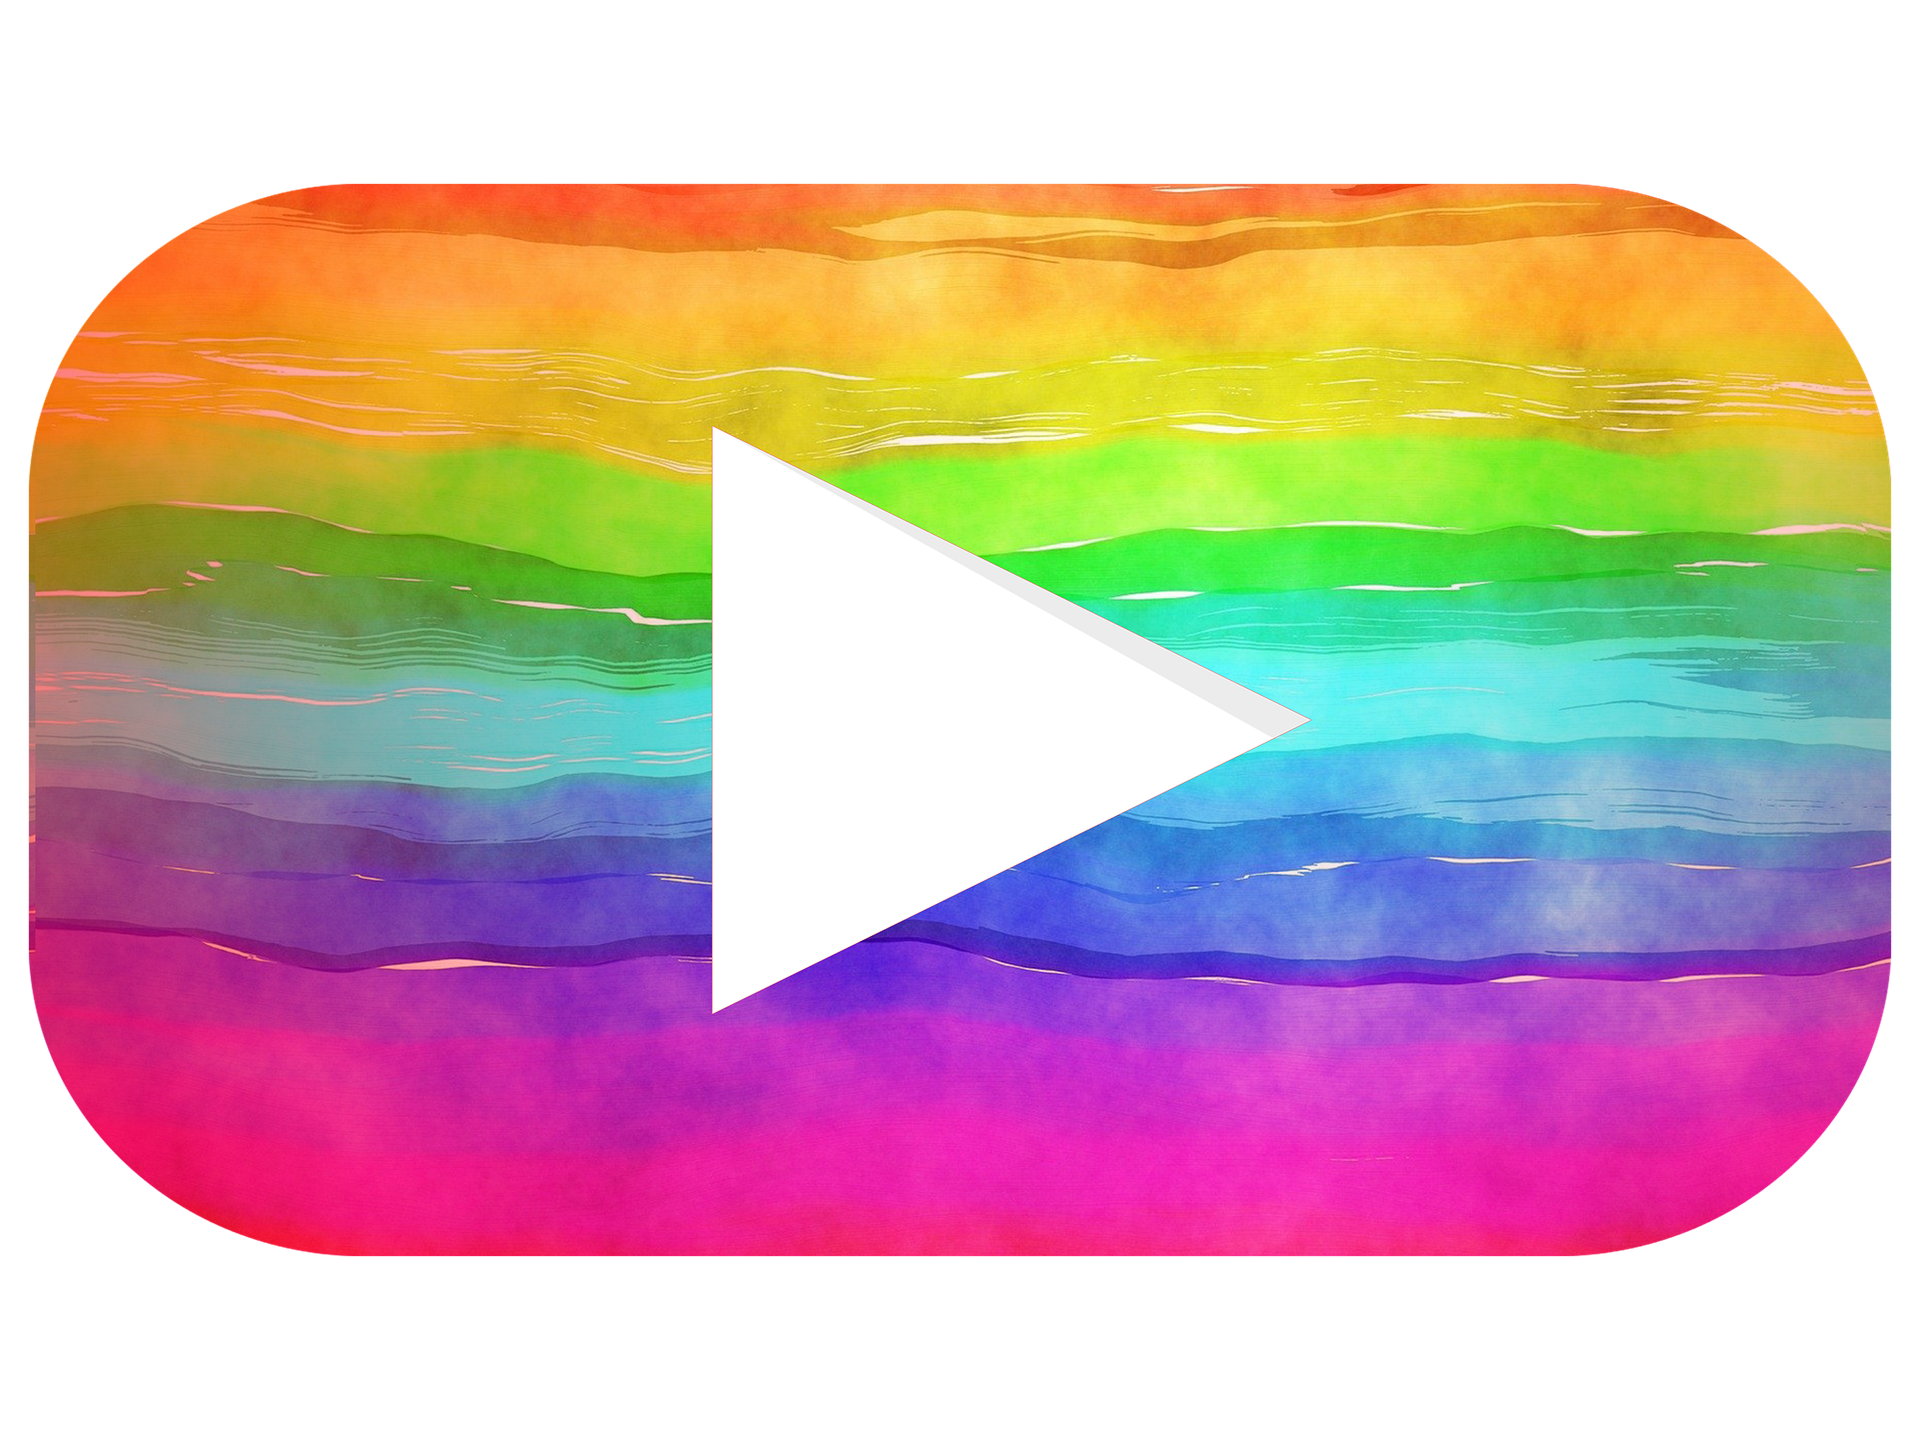 Webinar Recording | Play with Pride: LGBTQ Inclusiveness and Safety in Gaming